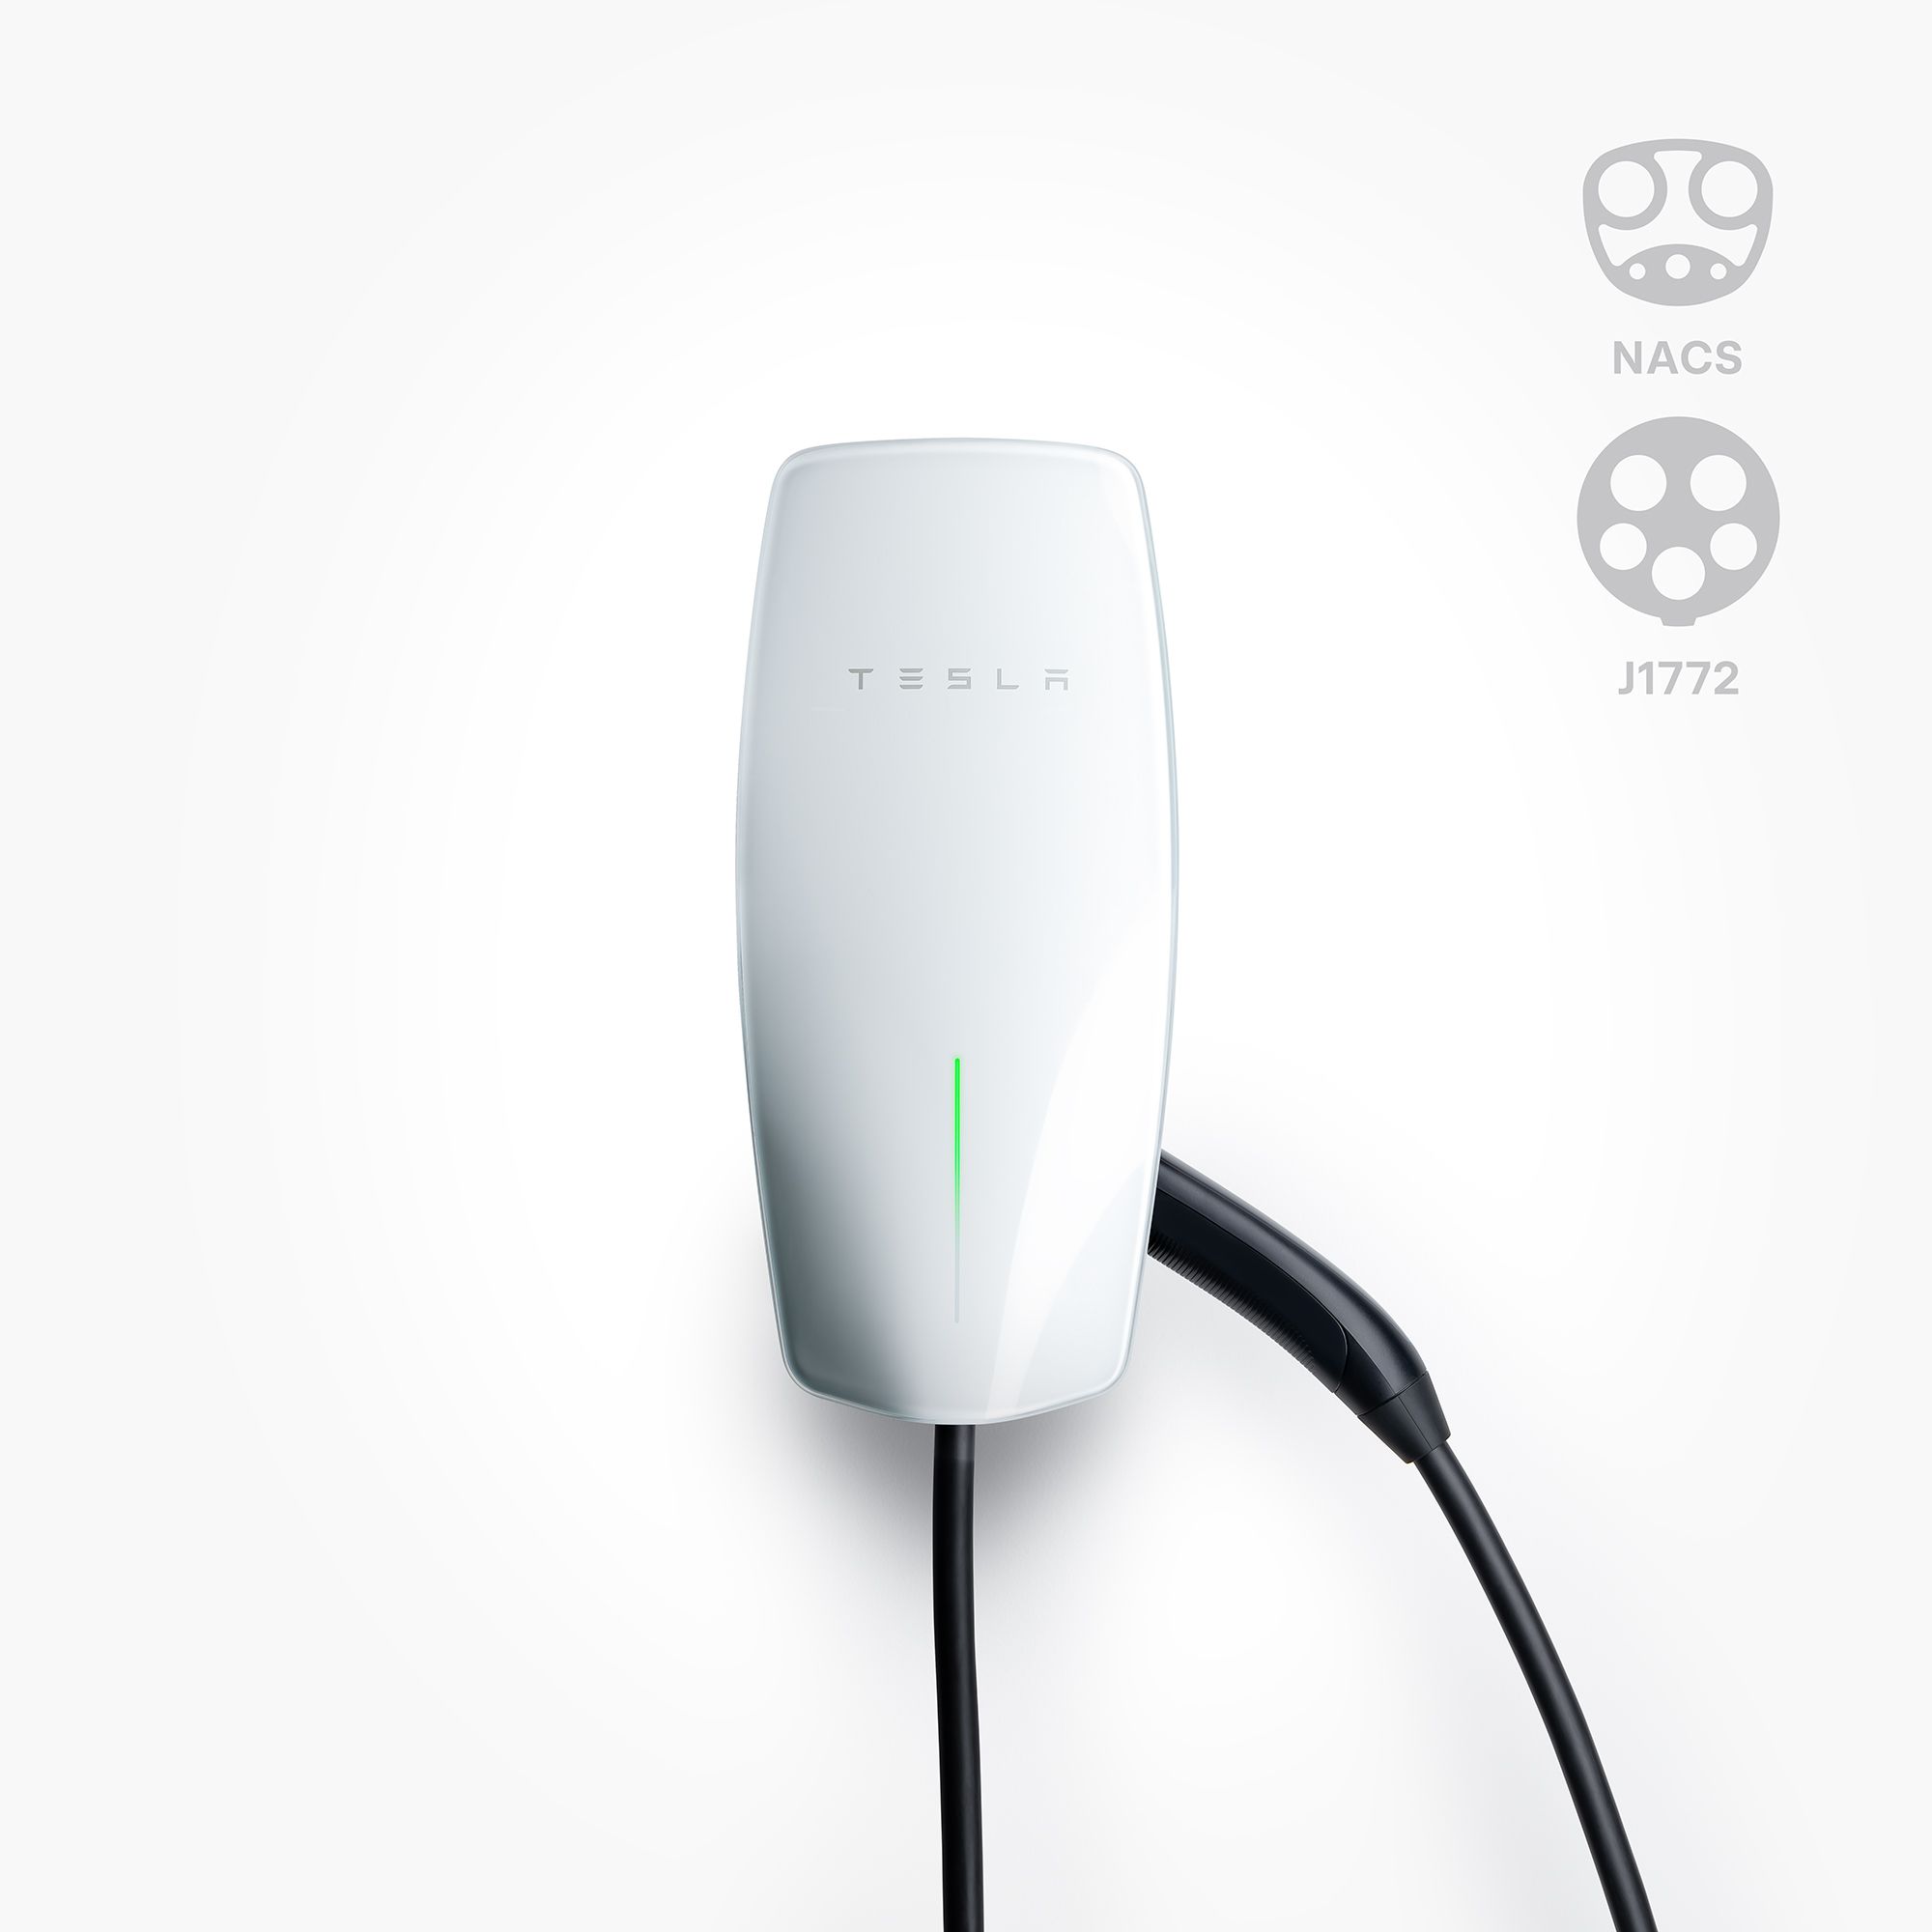 J1772 to Tesla Charging Connector - EV Chargers USA